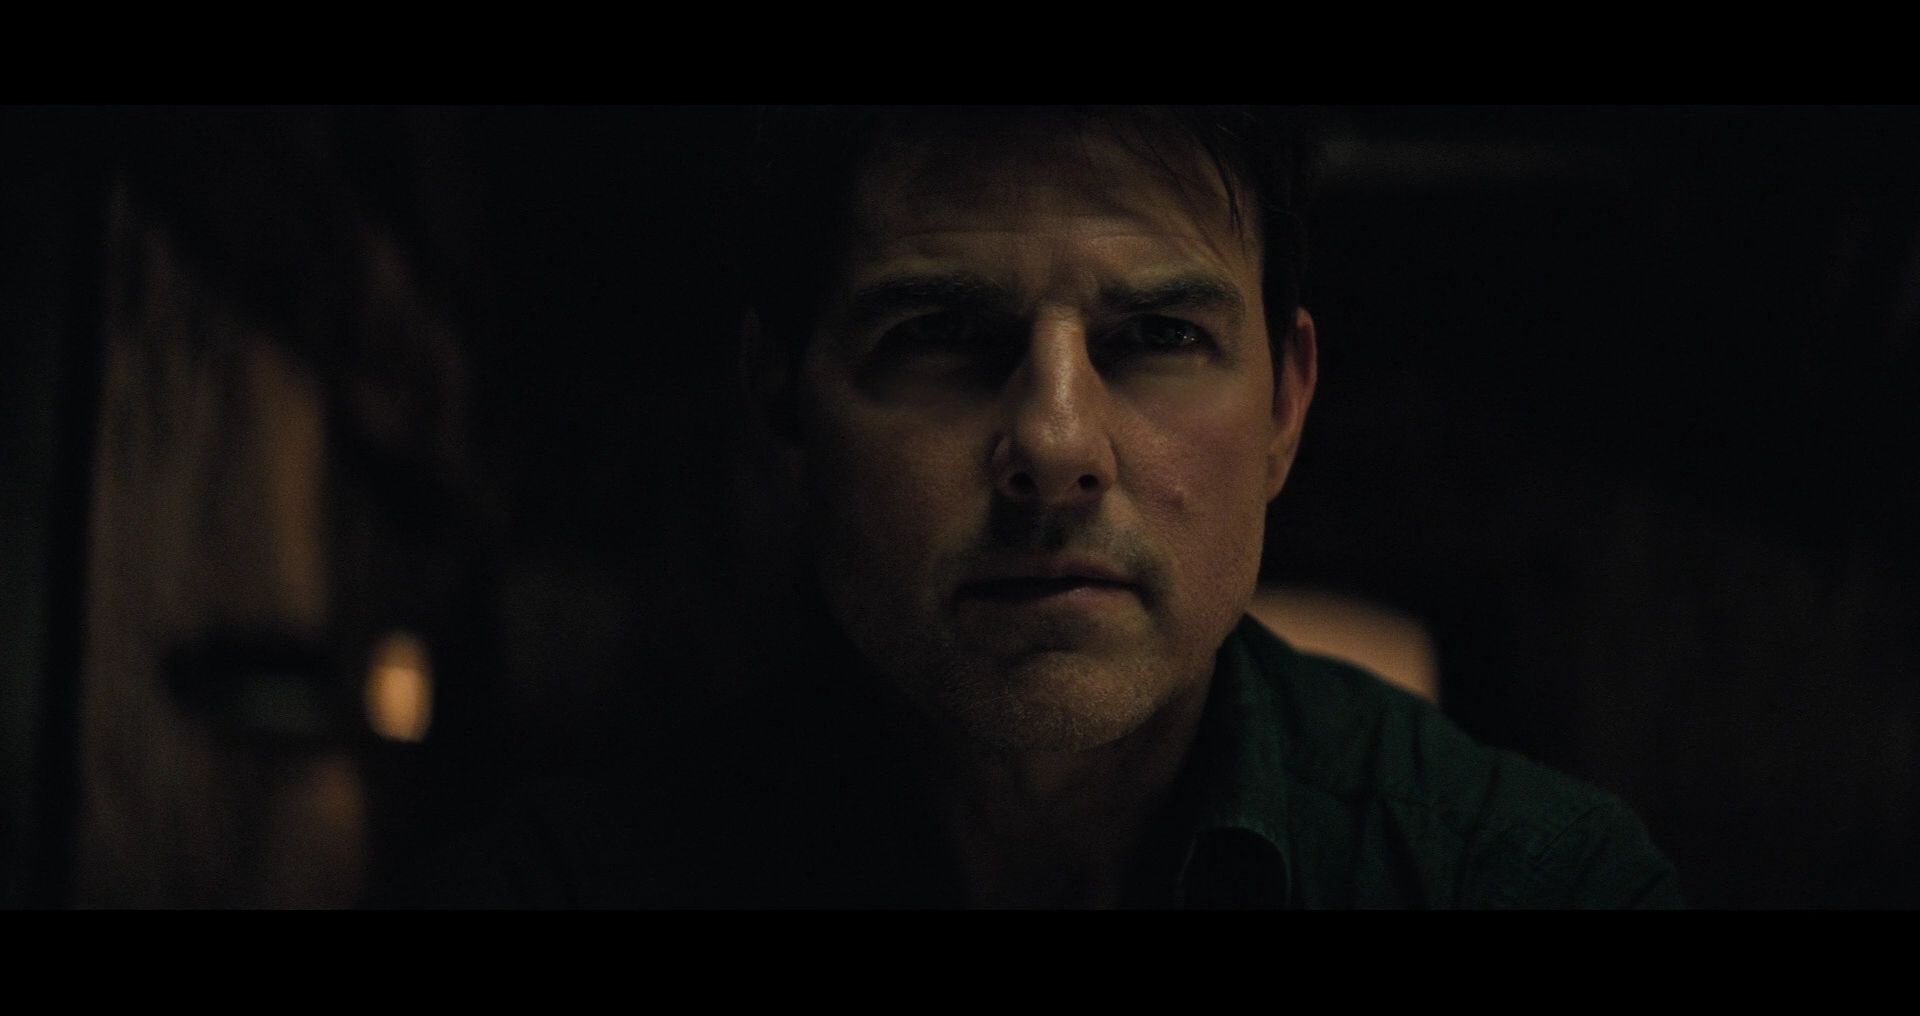 Mission-Impossible-Fallout-0101.jpg